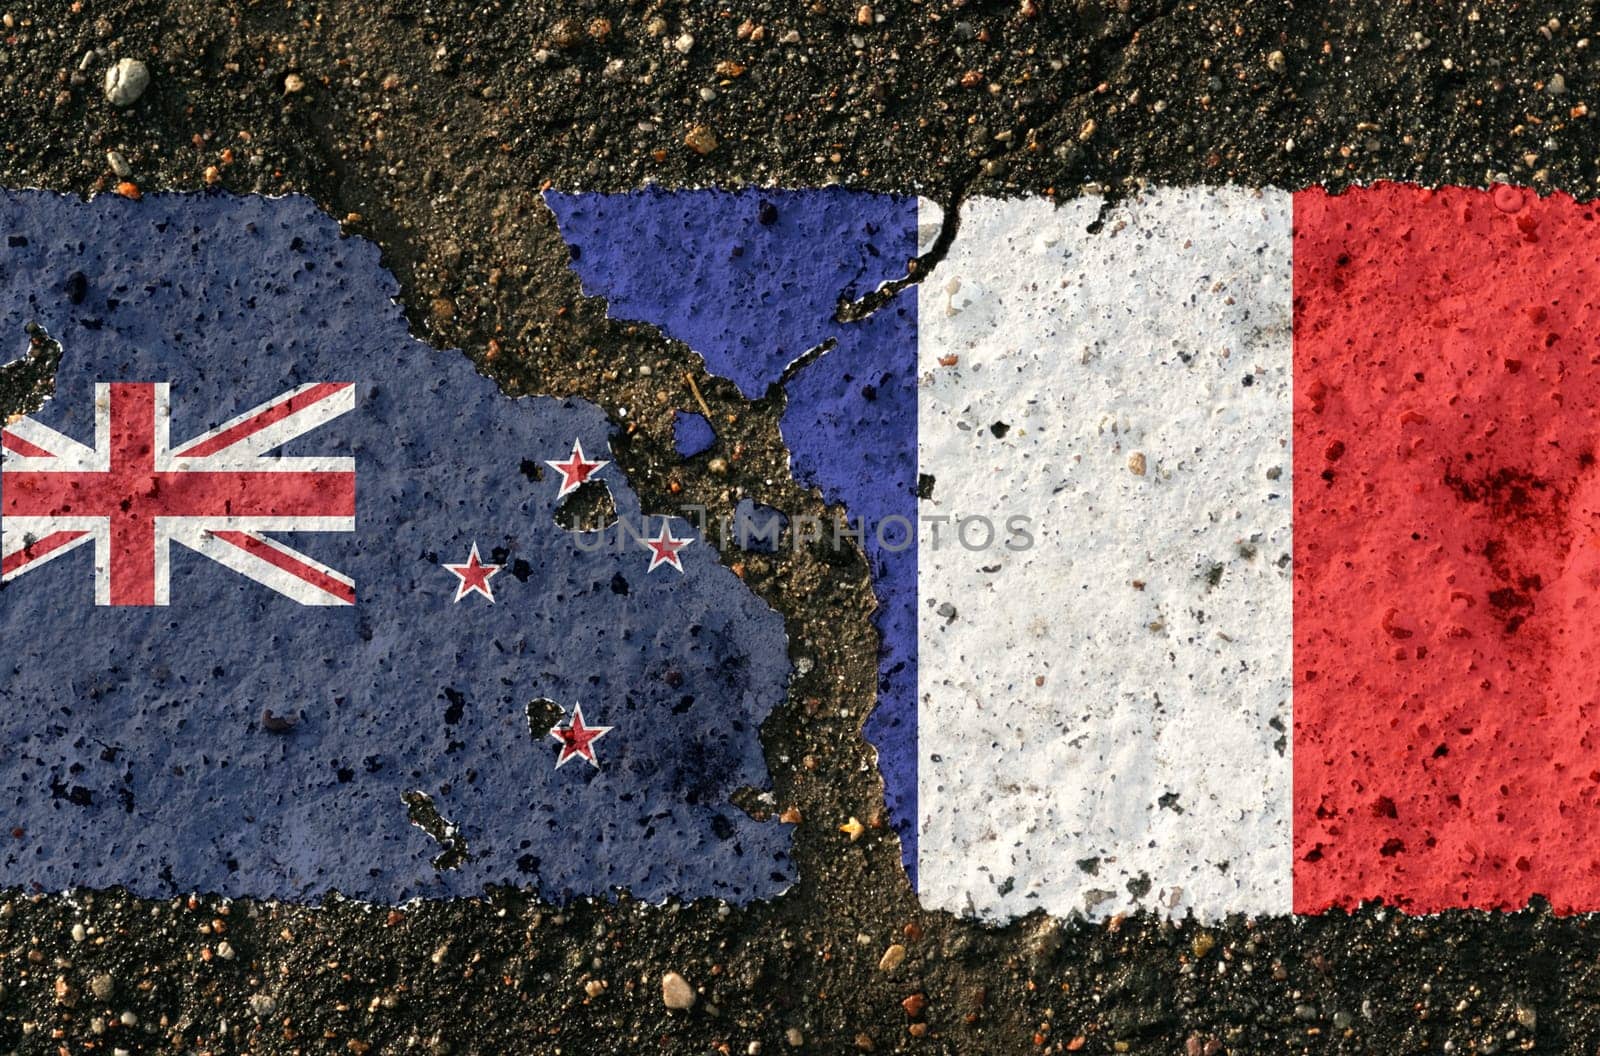 On the pavement are images of the flags of New Zealand and France, as a symbol of confrontation. Conceptual image.